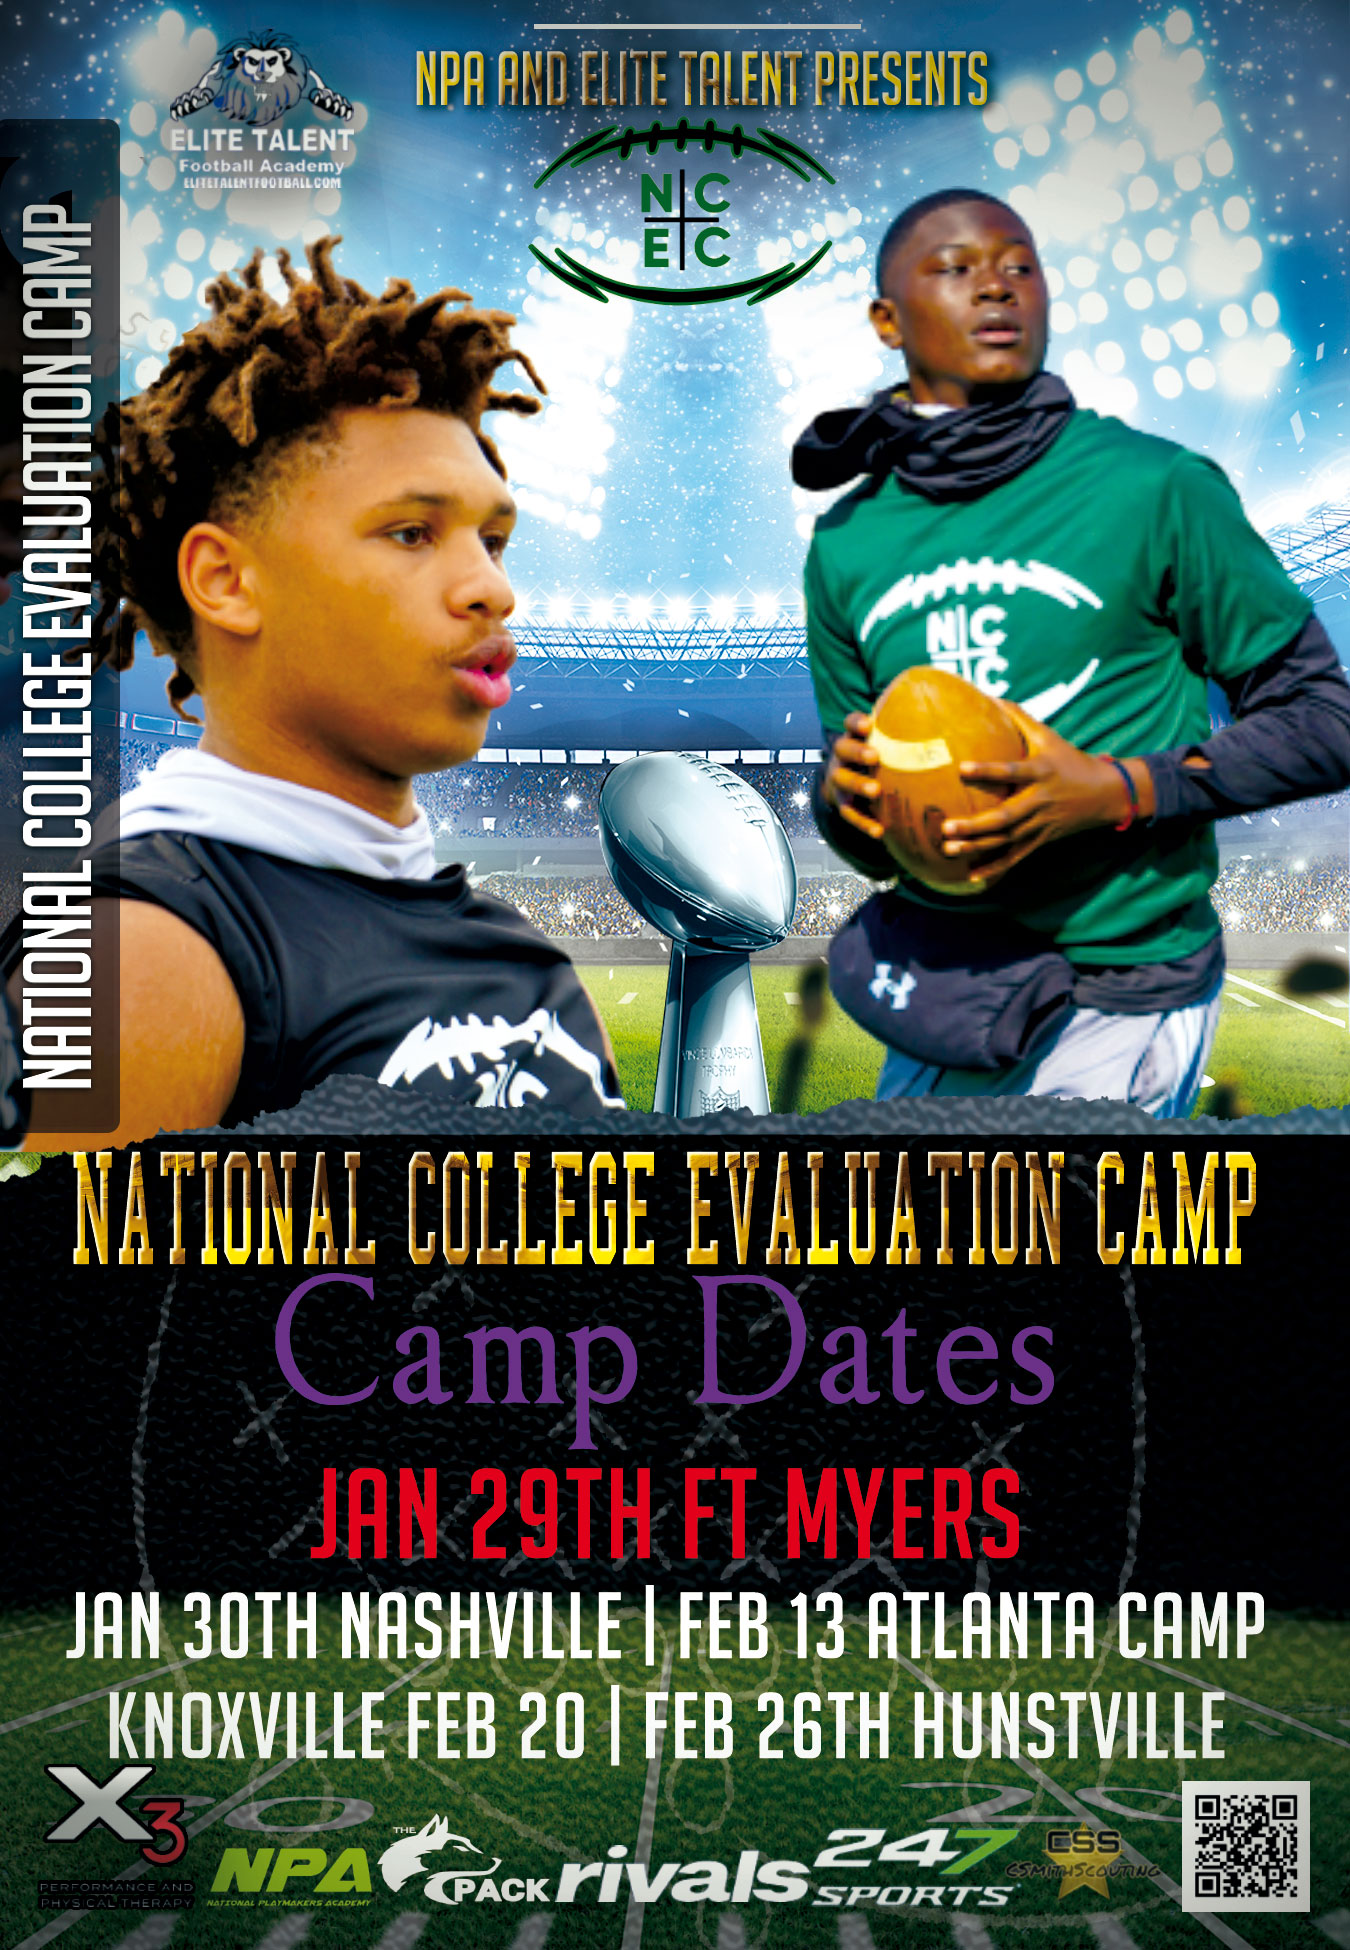 National College Evaluation Camp Tour To Take Place At The New Indoor Sports Facility In Ft Myers